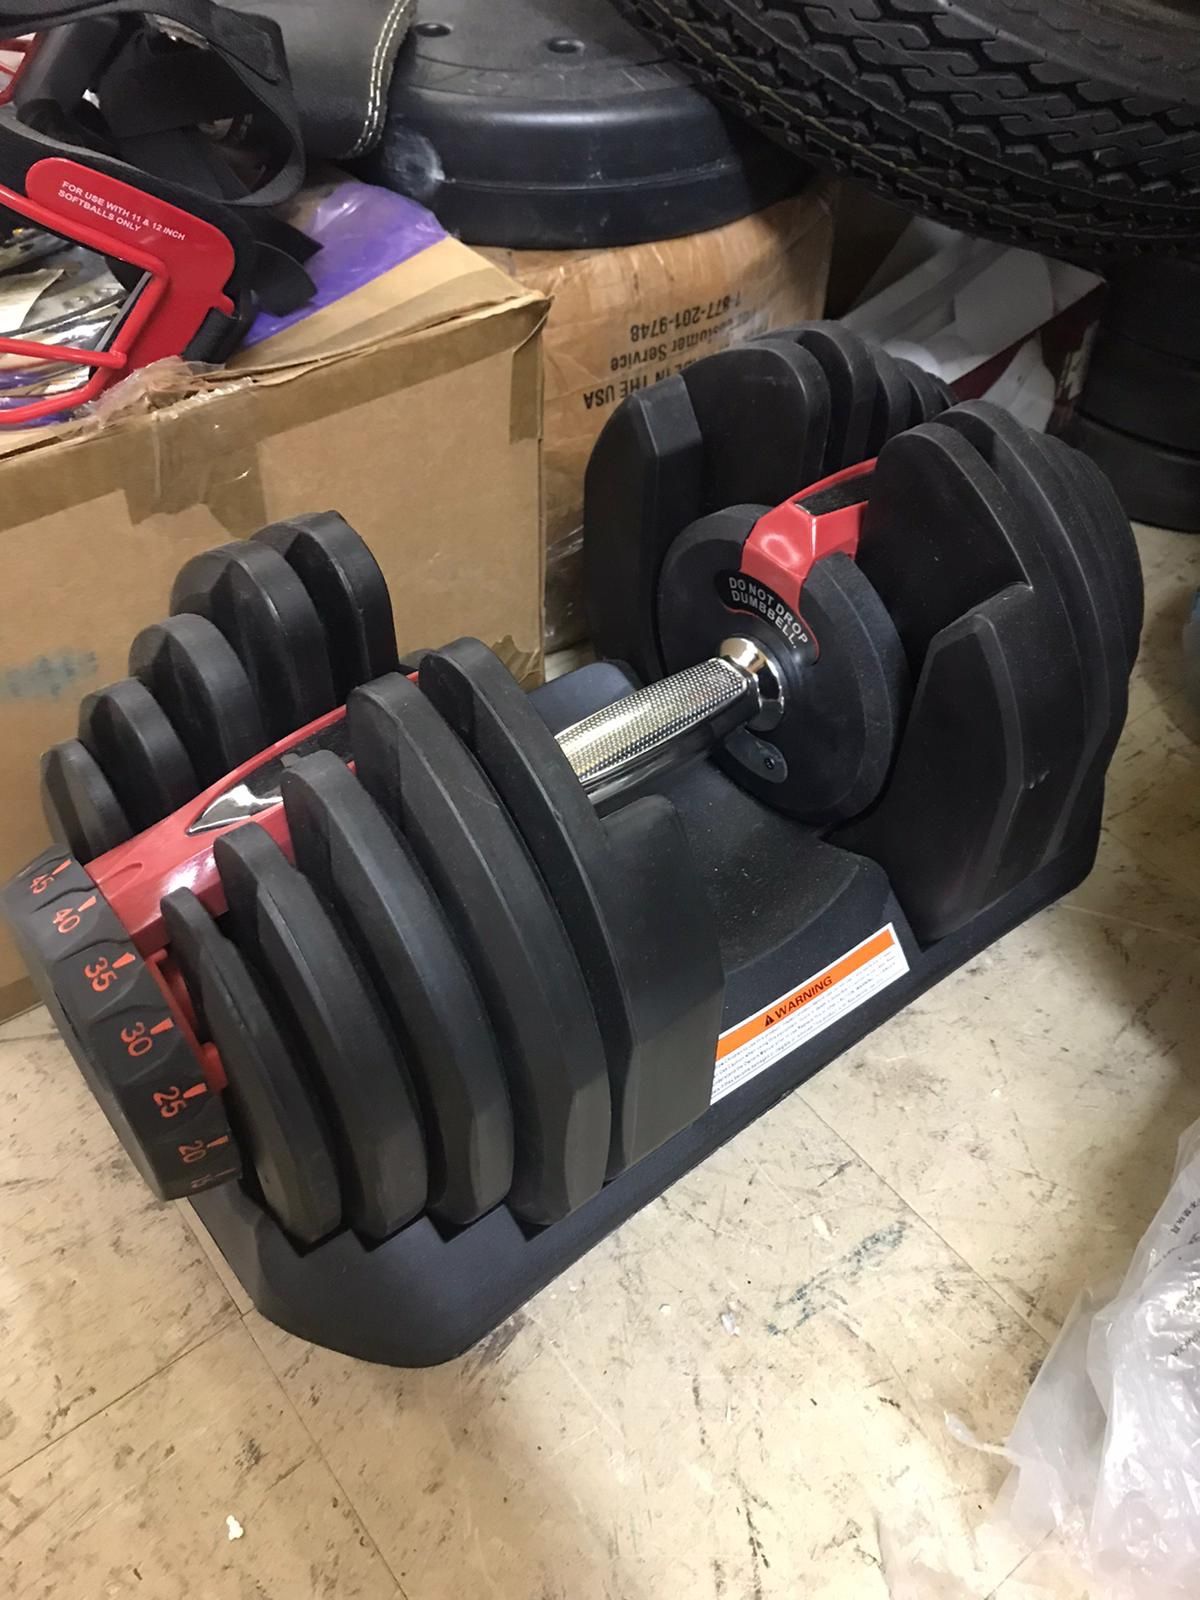 One (1) 90 lbs Adjustable Dumbbell. Only one available. Generic Brand. Better than Bowflex.